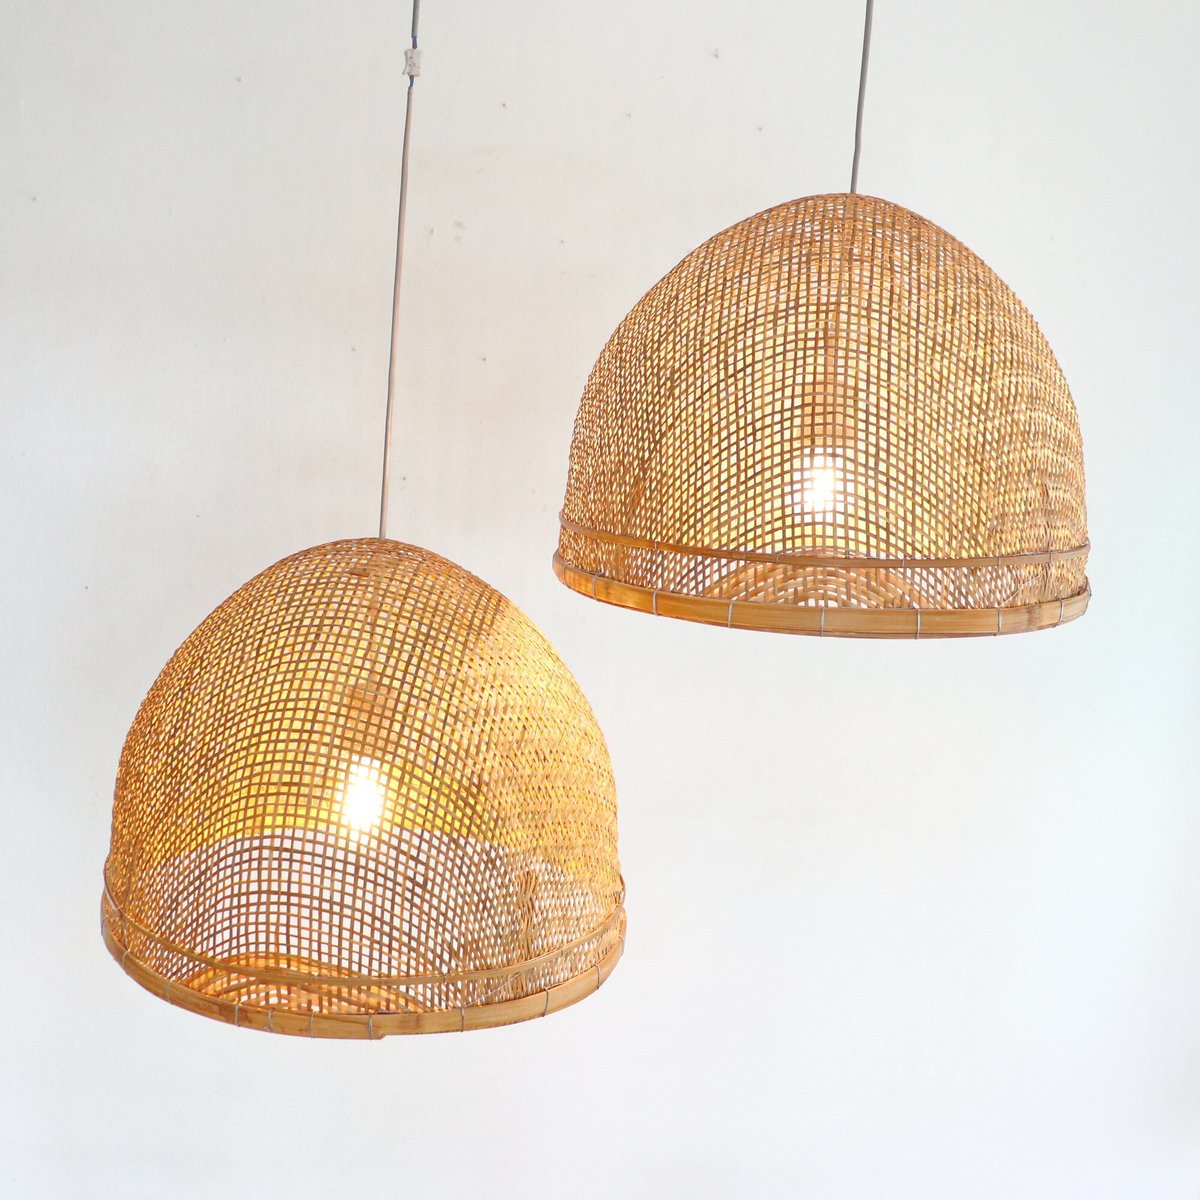 Excited to share the latest addition to my #etsy shop: Bamboo Pendant Light, Pendant Light, Pendant Lamps, Handmade Bamboo, Home Decoration Pendant Lamps, Wicker Bamboo Lamp, Lighting Bamboo etsy.me/3HccMWL #bedroom #rusticprimitive #bamboo #yes #woodlamp #bamb